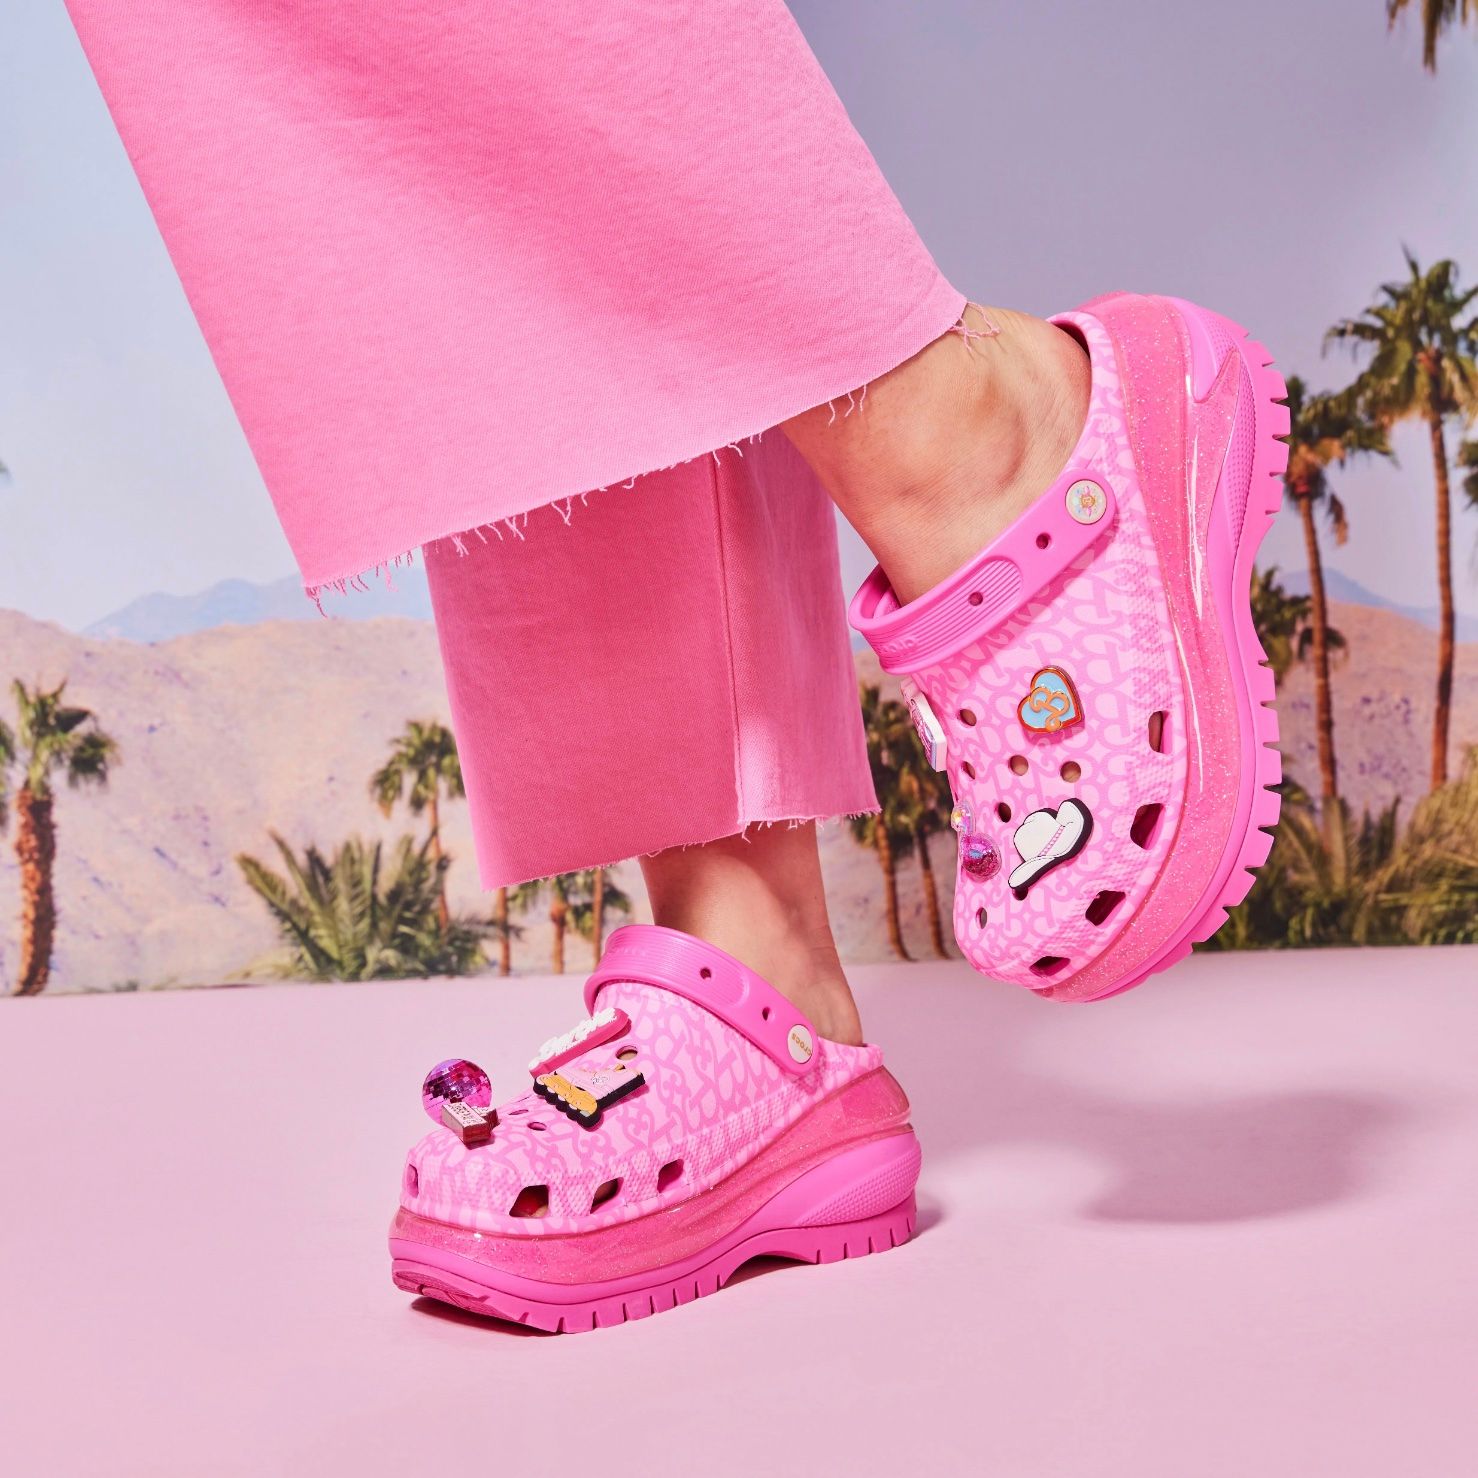 'Lab Report: Crocs x Barbie releases pink-themed collection